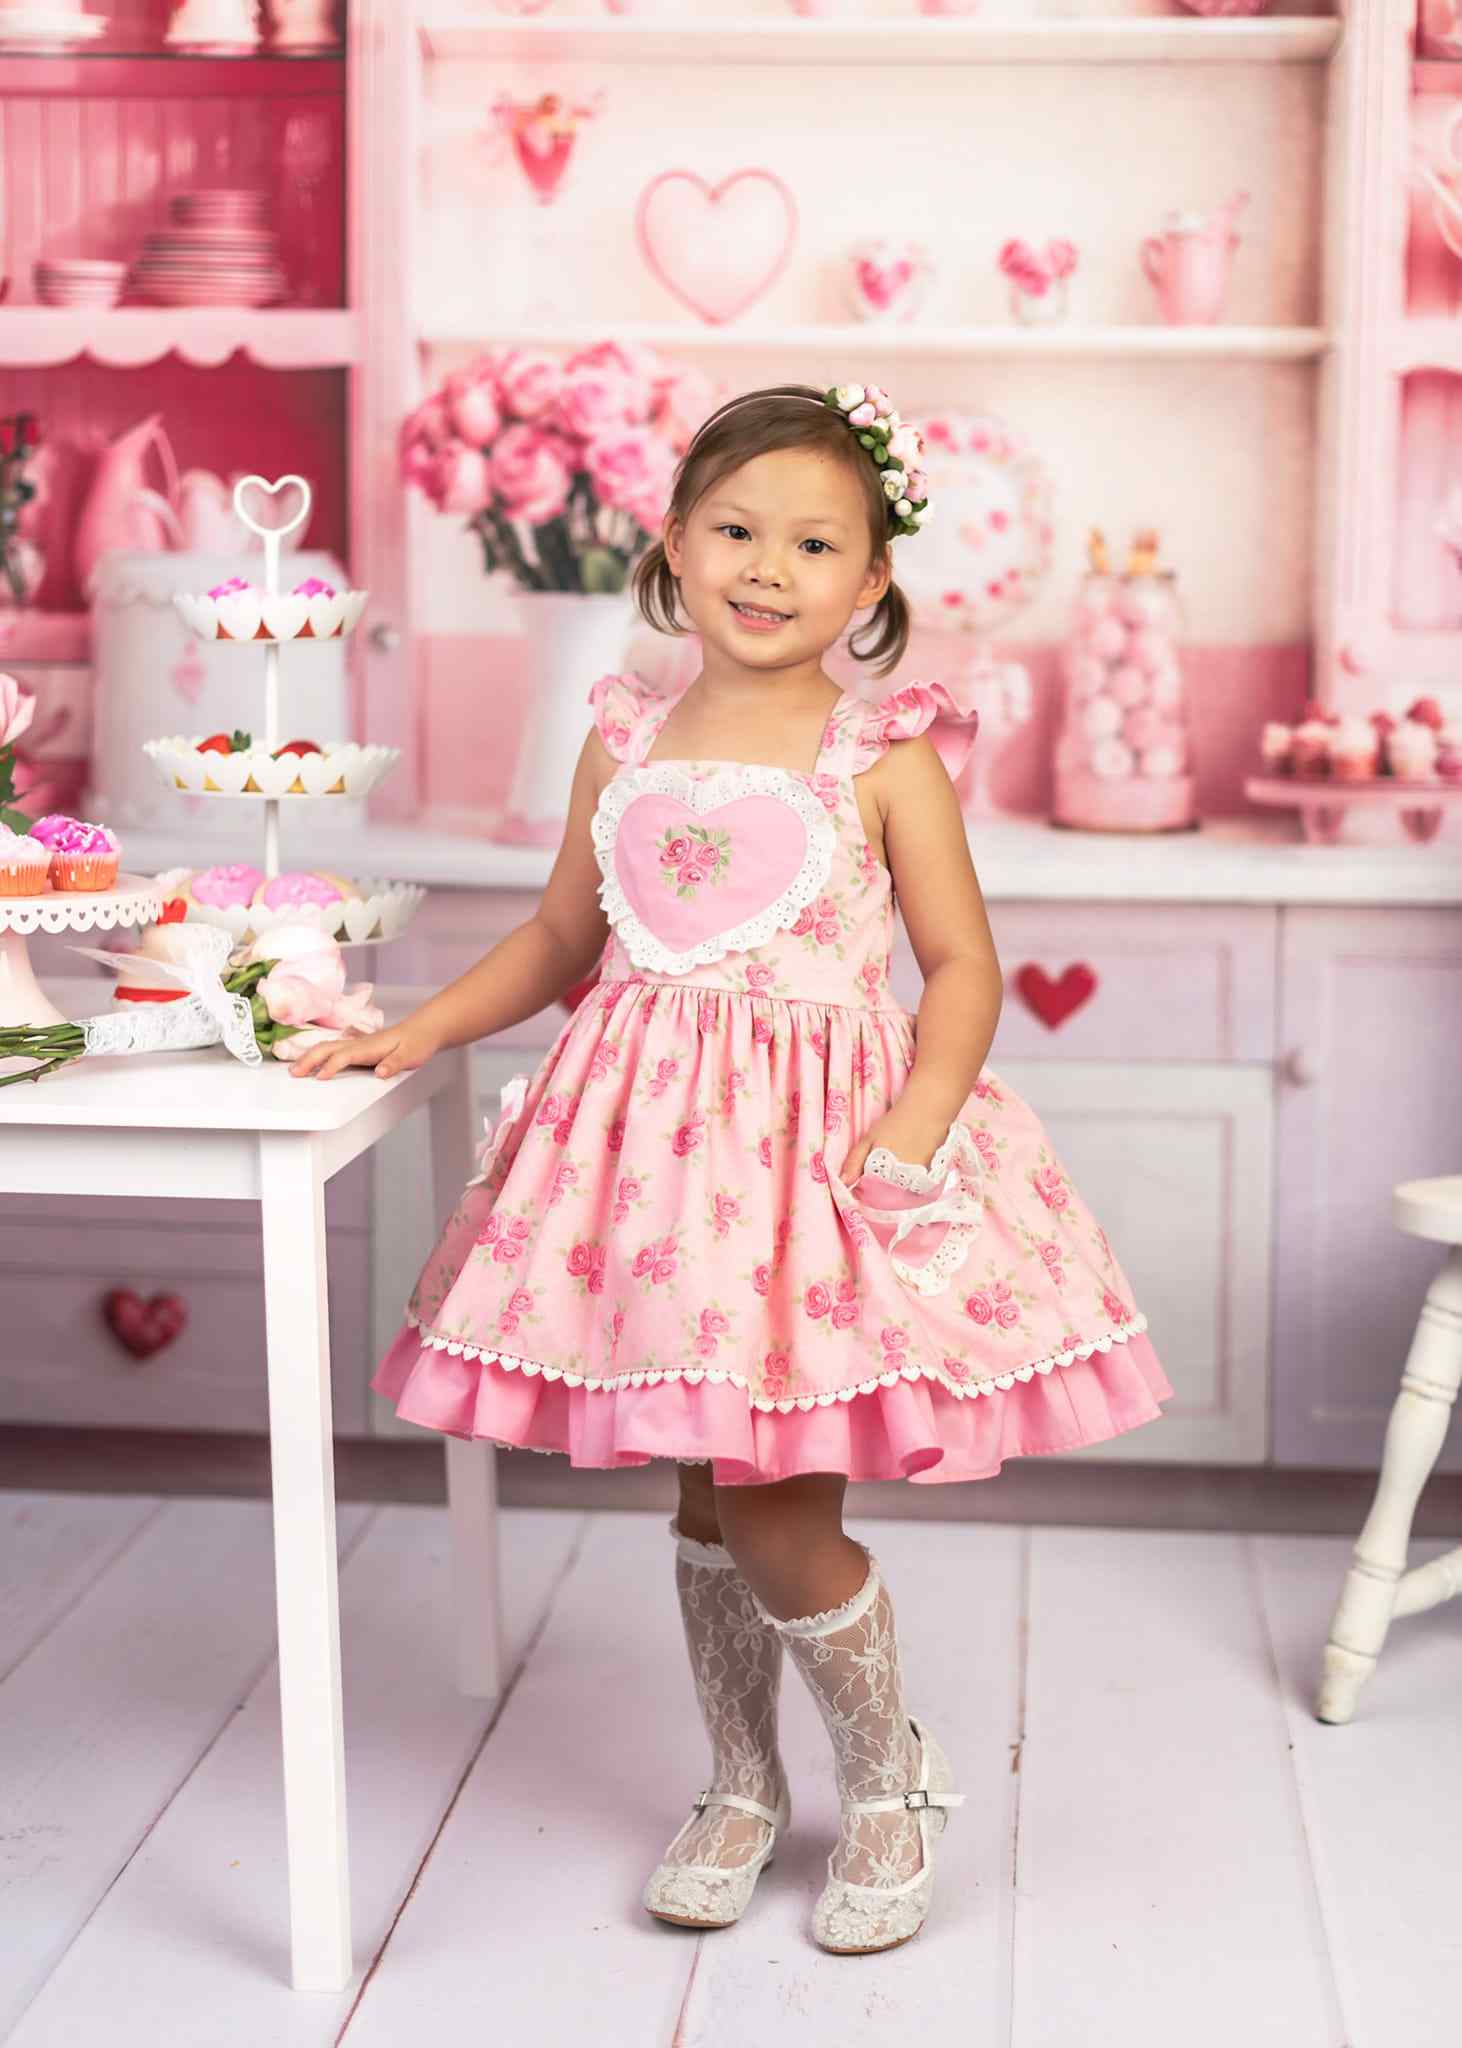 Kate Valentine's Day Pink Sweet Kitchen Backdrop Designed by Emetselch